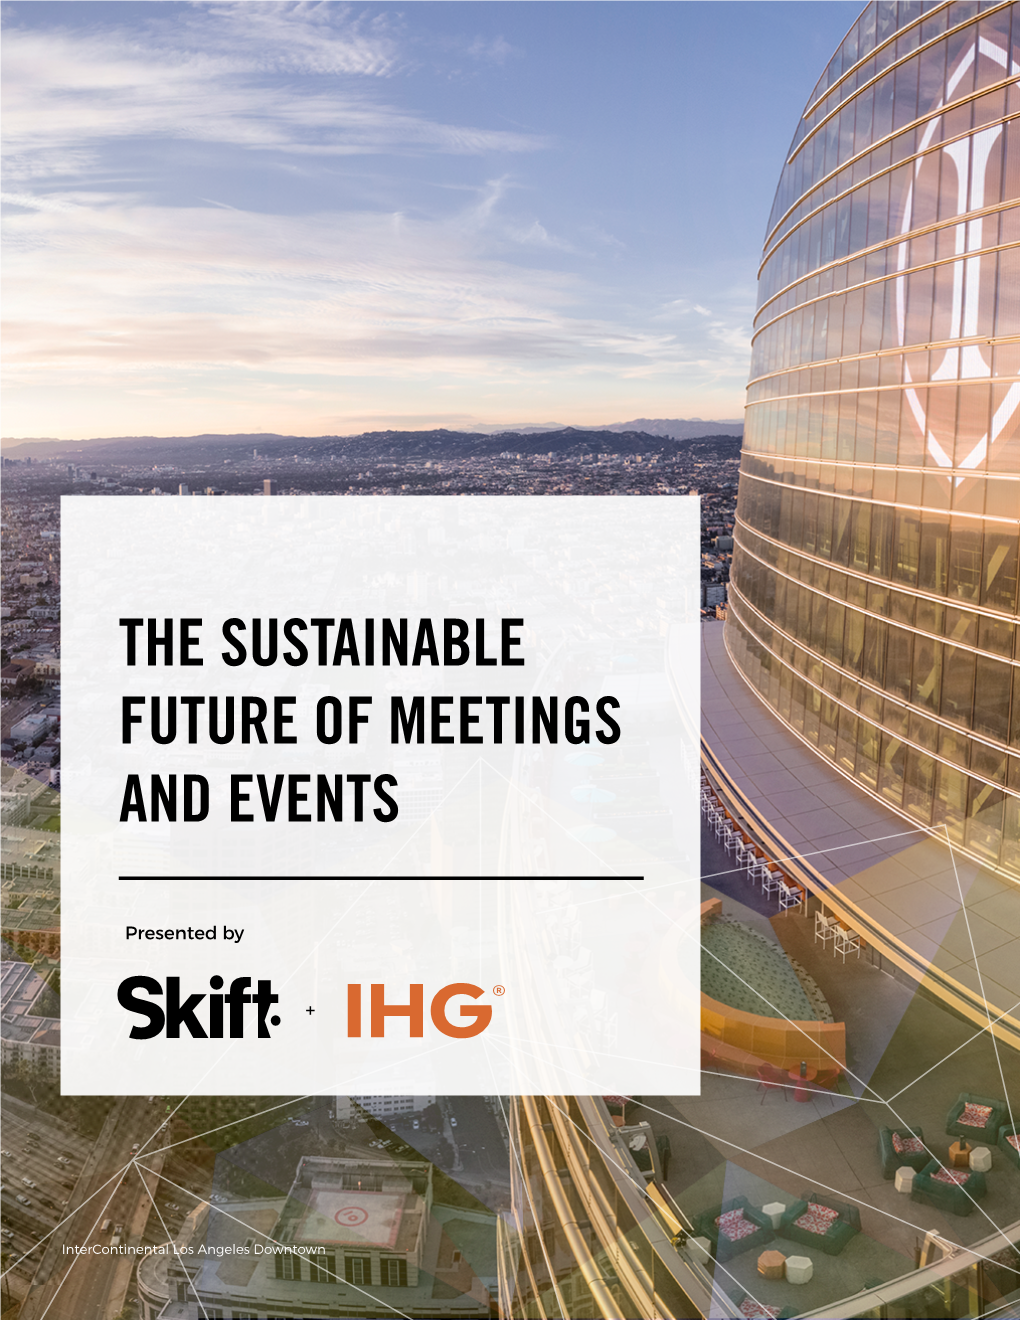 The Sustainable Future of Meetings and Events